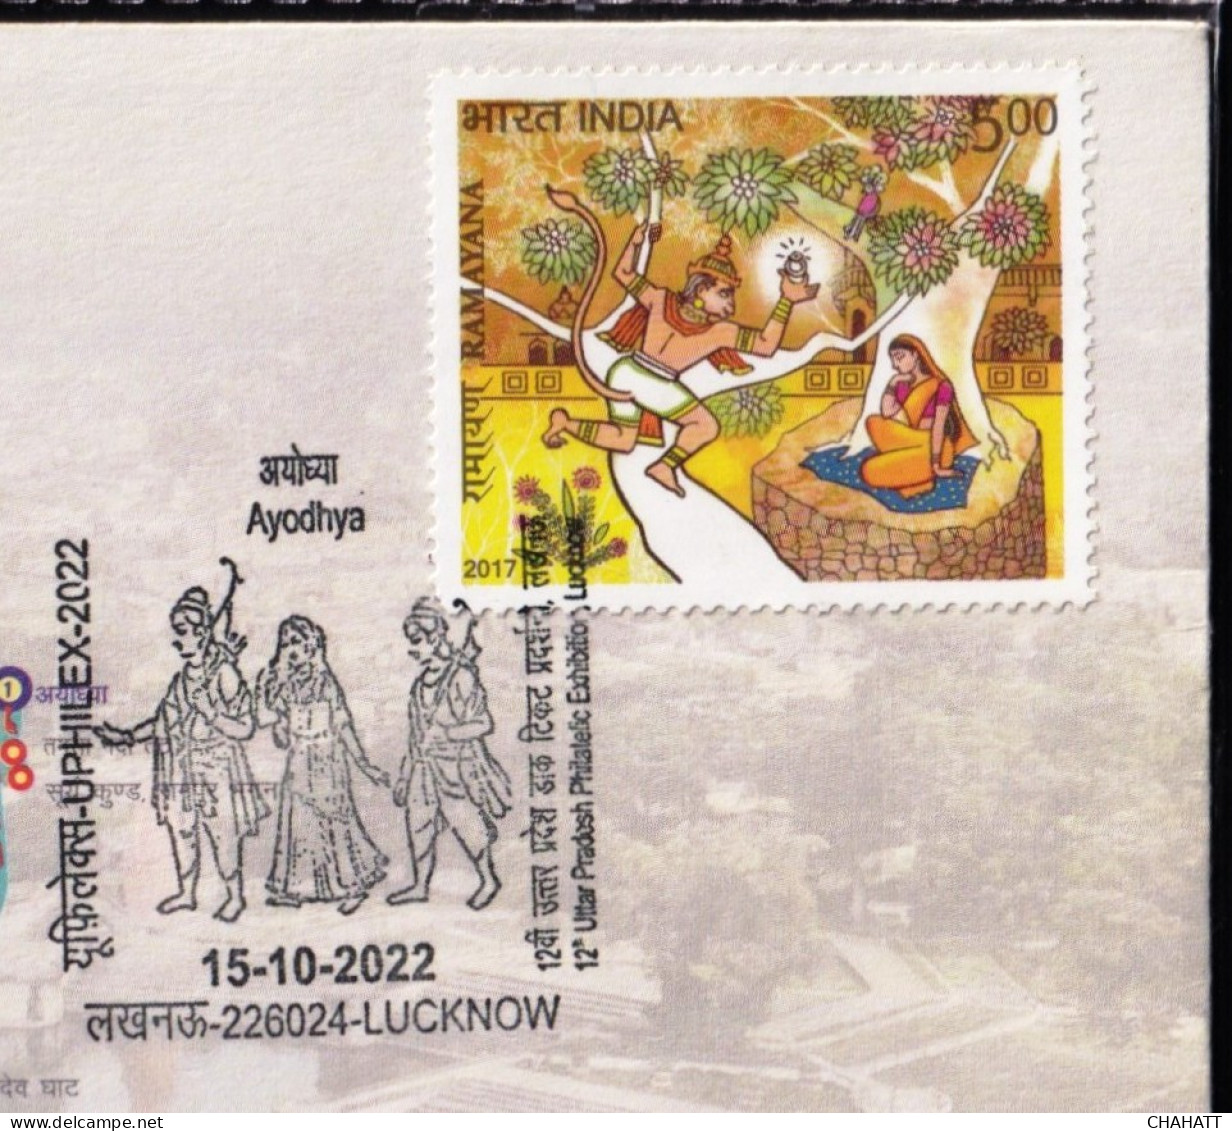 HINDUISM - RAMAYAN-  ARCHERY, AYODHYA - PICTORIAL CANCELLATION - SPECIAL COVER - INDIA -2022- BX4-23 - Hindoeïsme